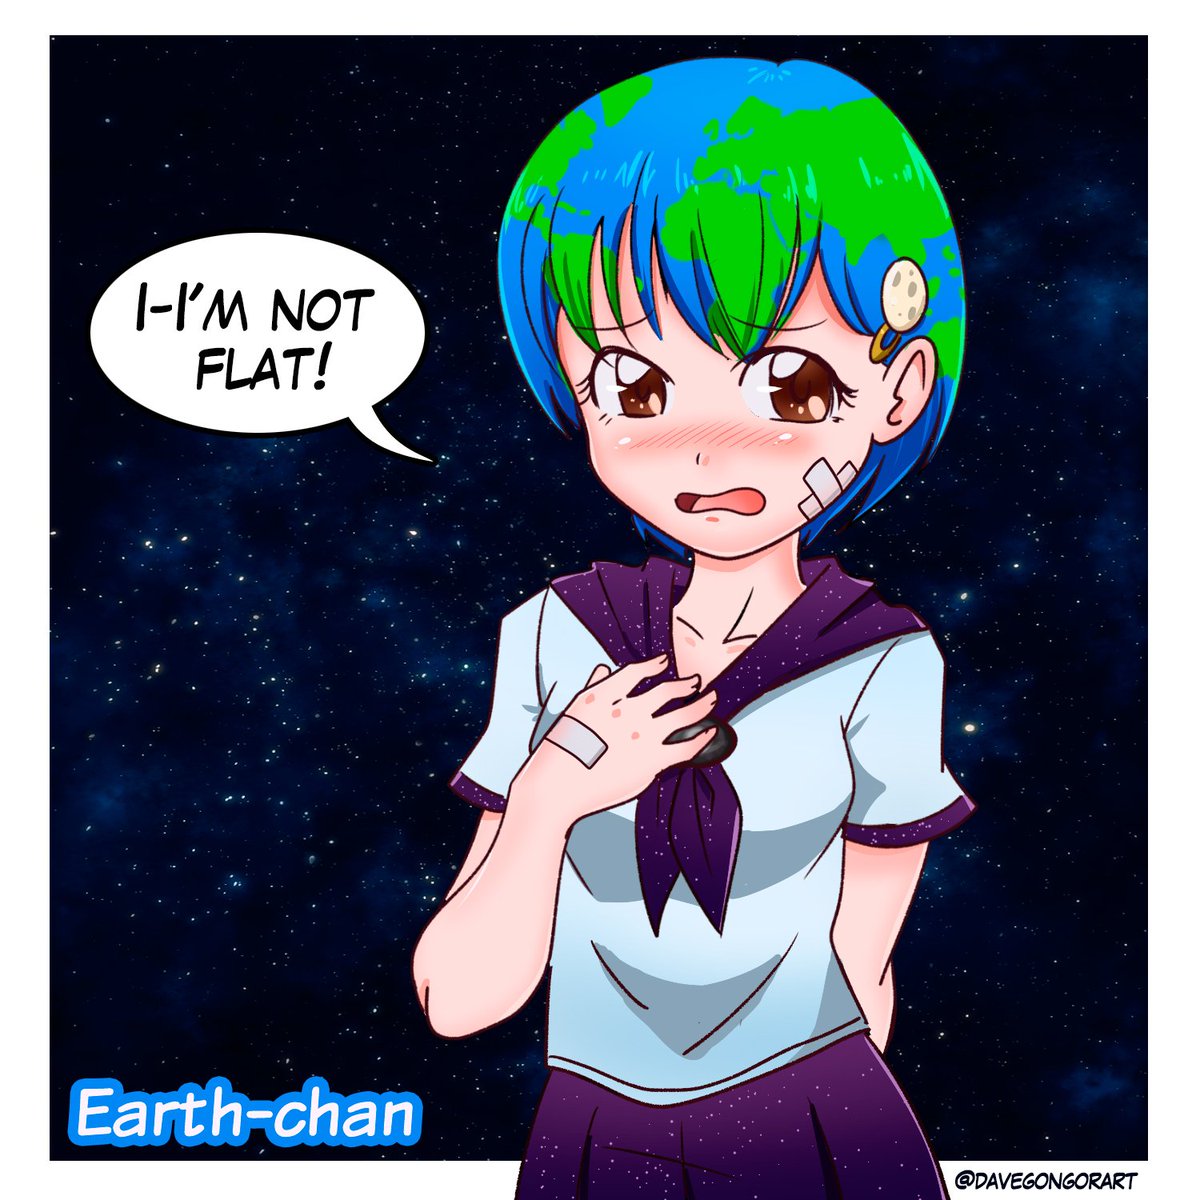 David N Gngora On Twitter Earth Chan Has A Very Special Message